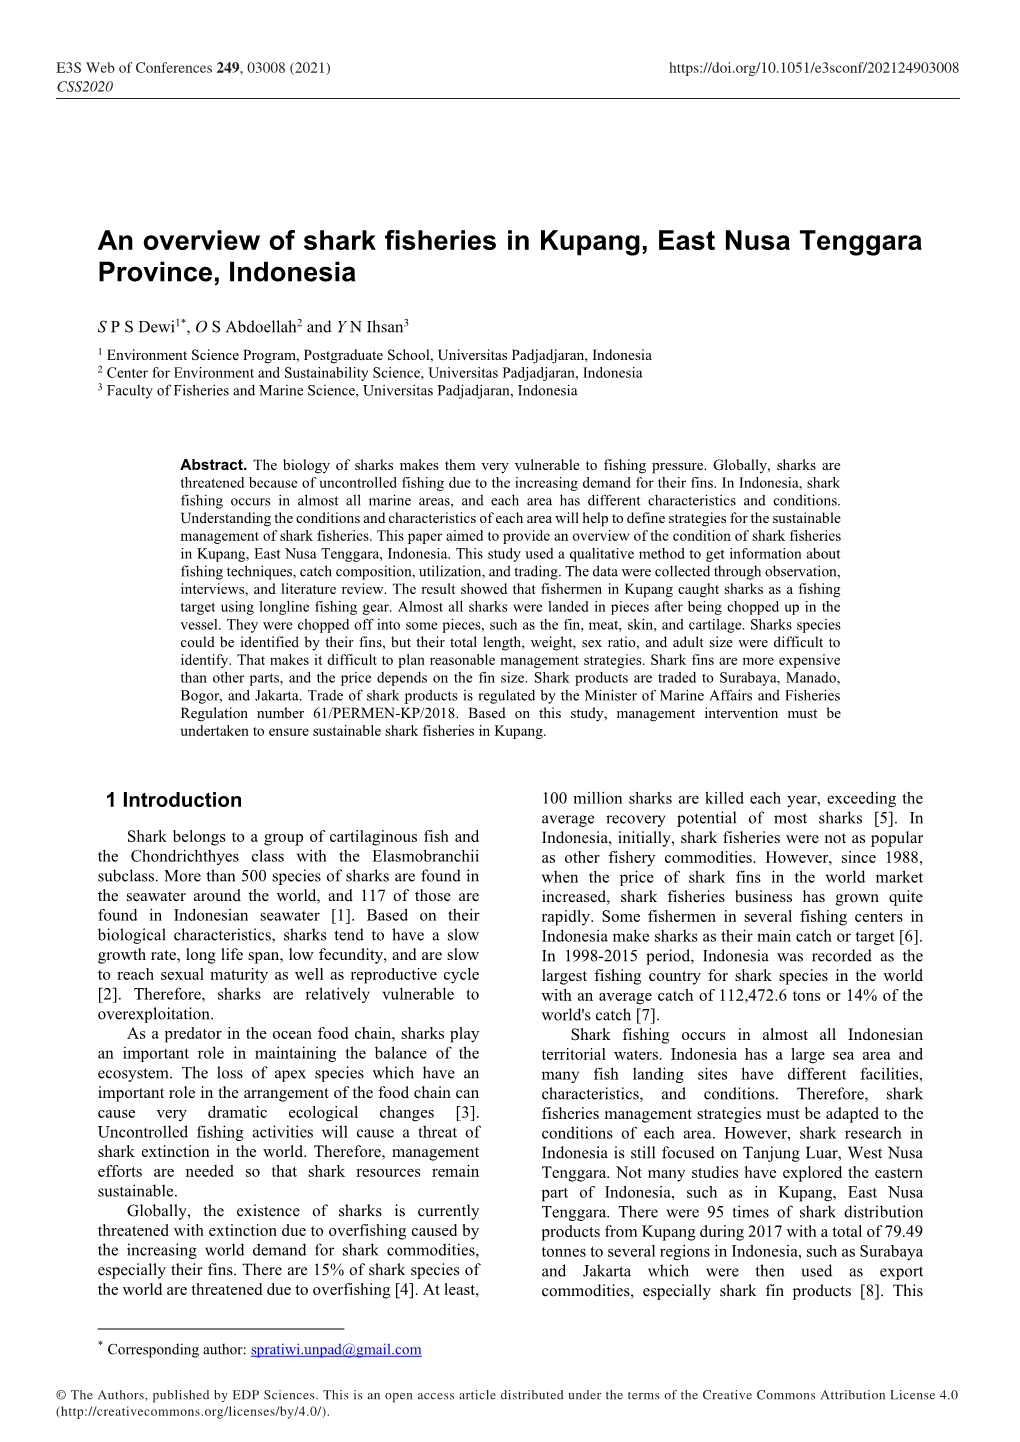 An Overview of Shark Fisheries in Kupang, East Nusa Tenggara Province, Indonesia